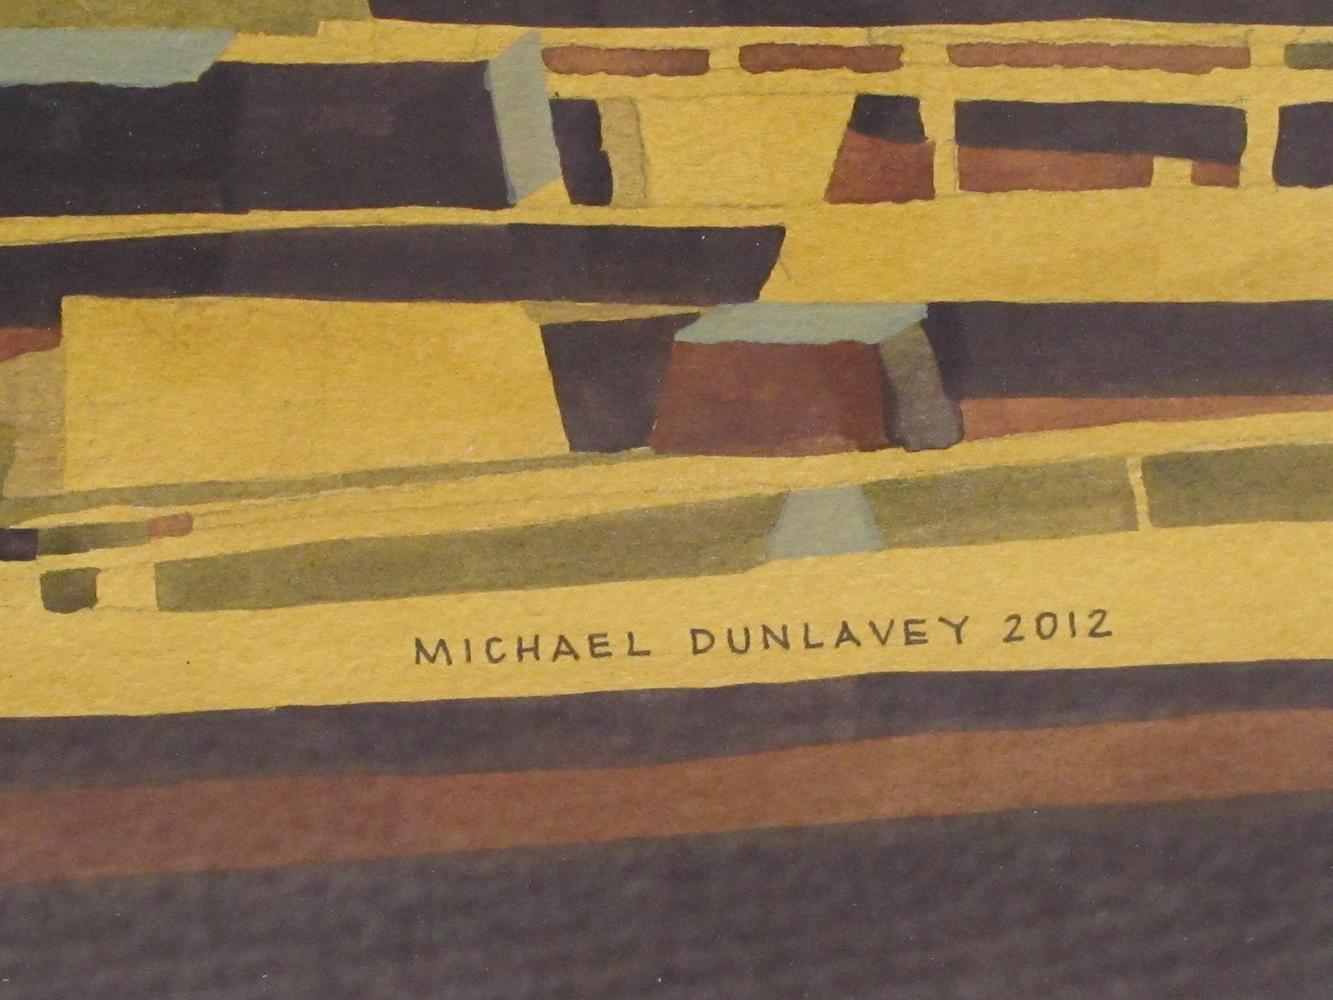 Other Watercolor on Paper Hong Kong Boat Works 1969 Signed 'Michael Dunlavey 2012' For Sale